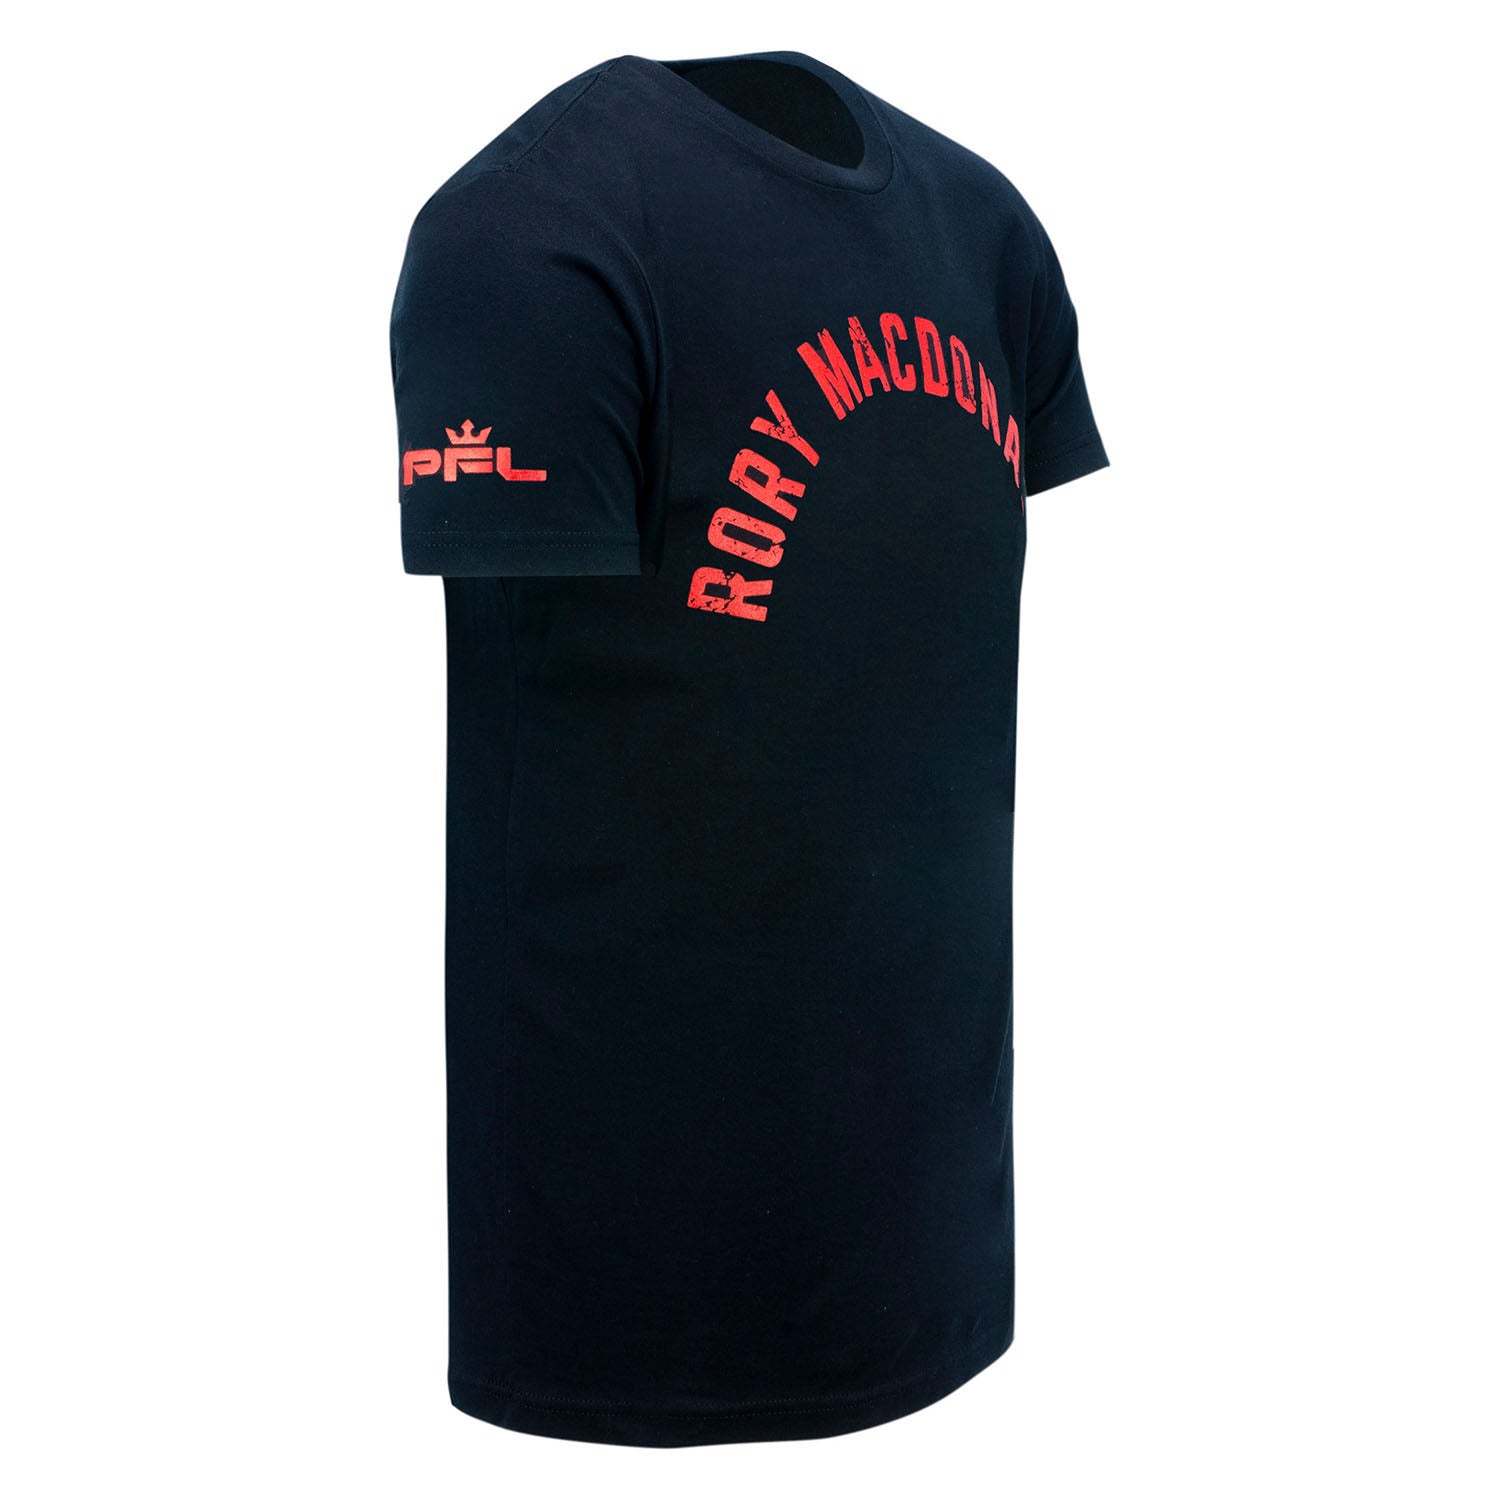 Rory Red King Shirt in Black - Back View